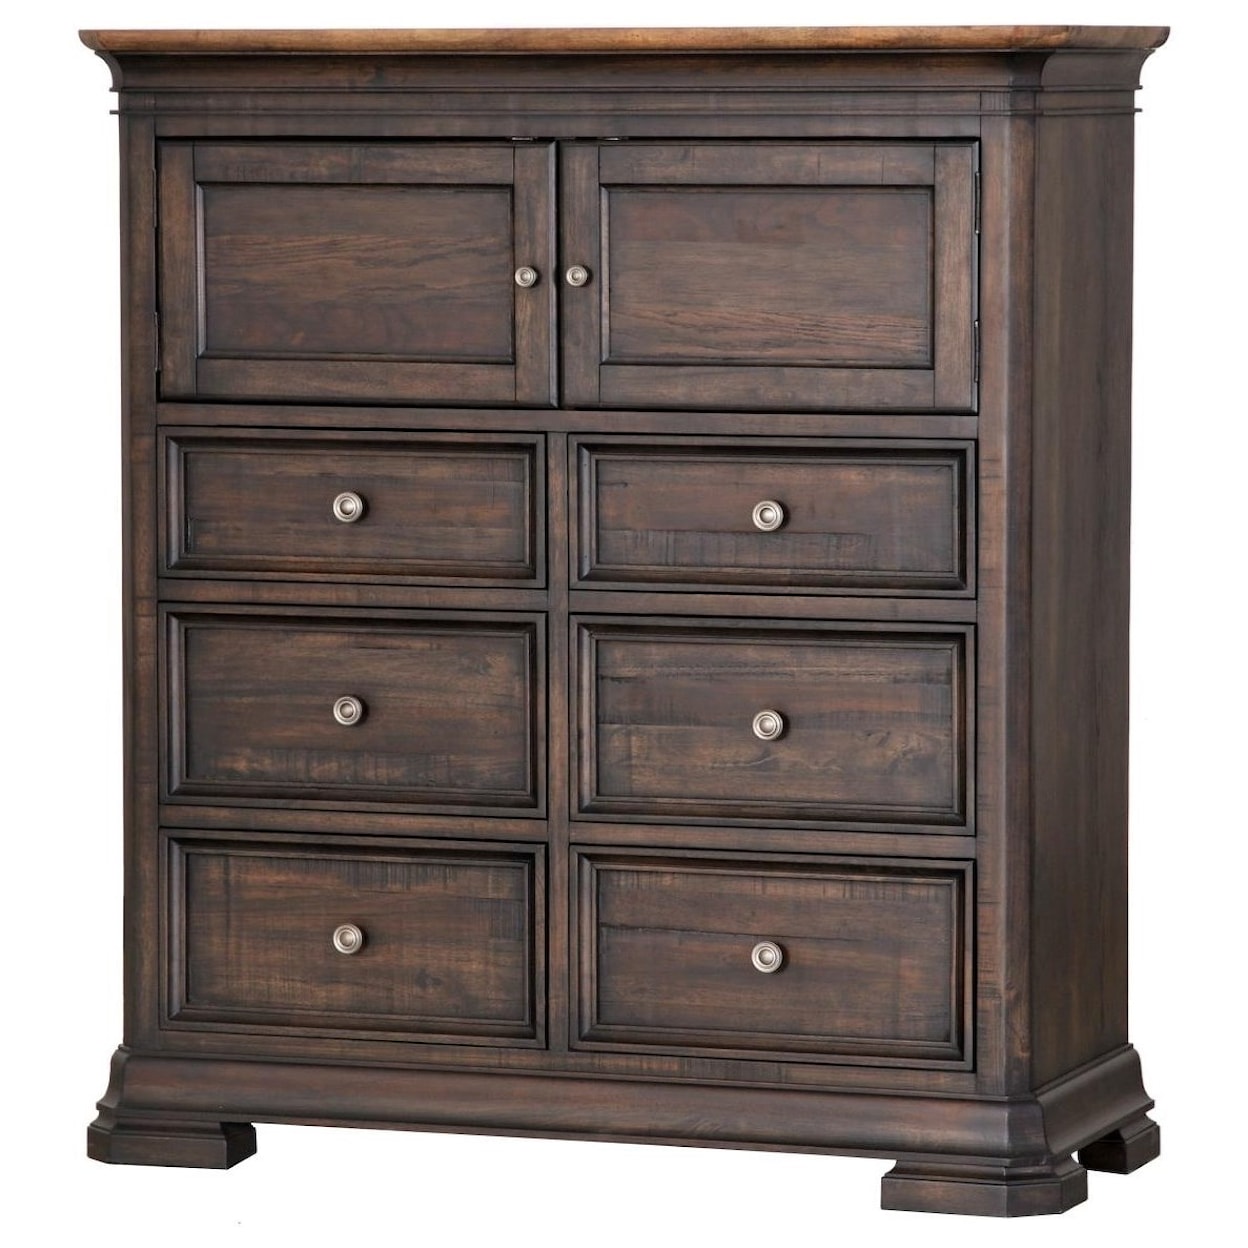 Napa Furniture Design The Grand Louie Chest with Doors